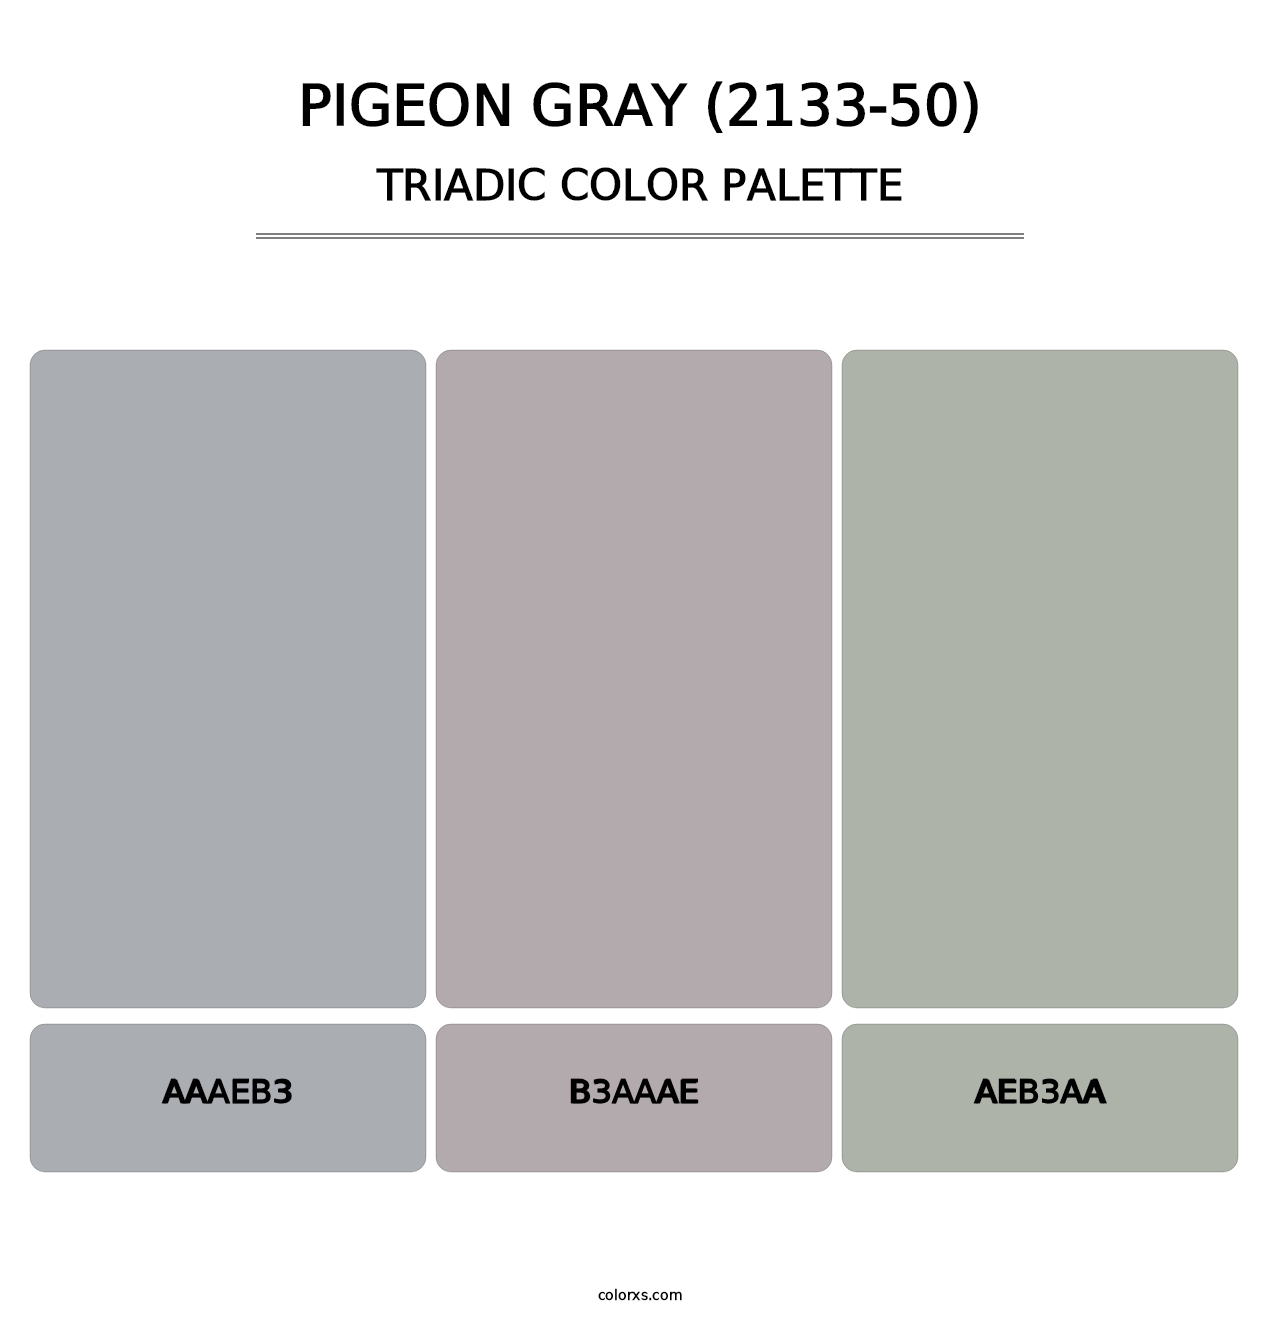 Pigeon Gray (2133-50) - Triadic Color Palette